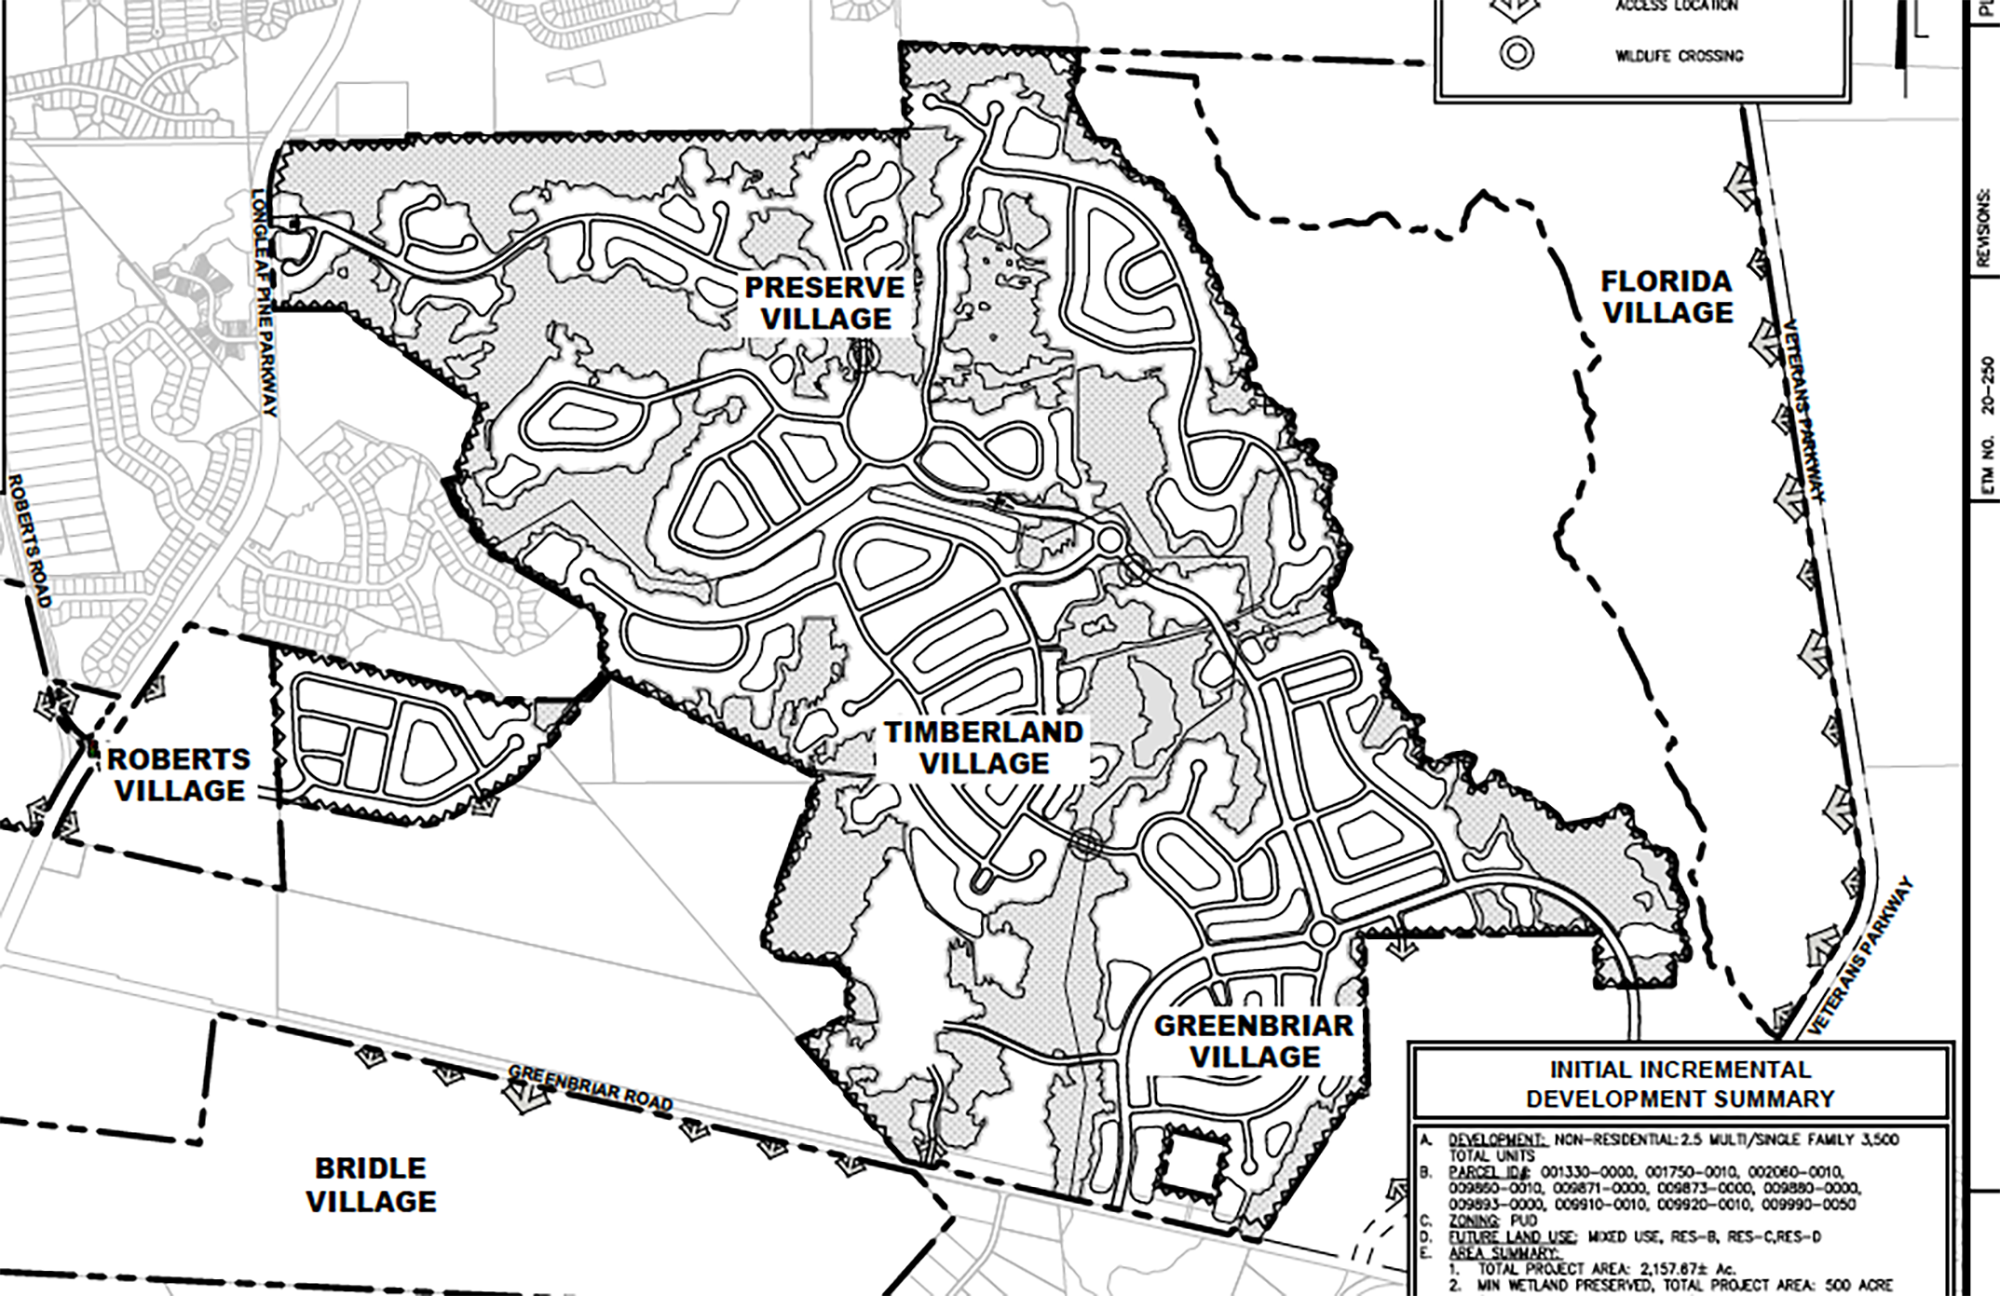 The Greenbriar Helow master-planned community in St. Johns County.